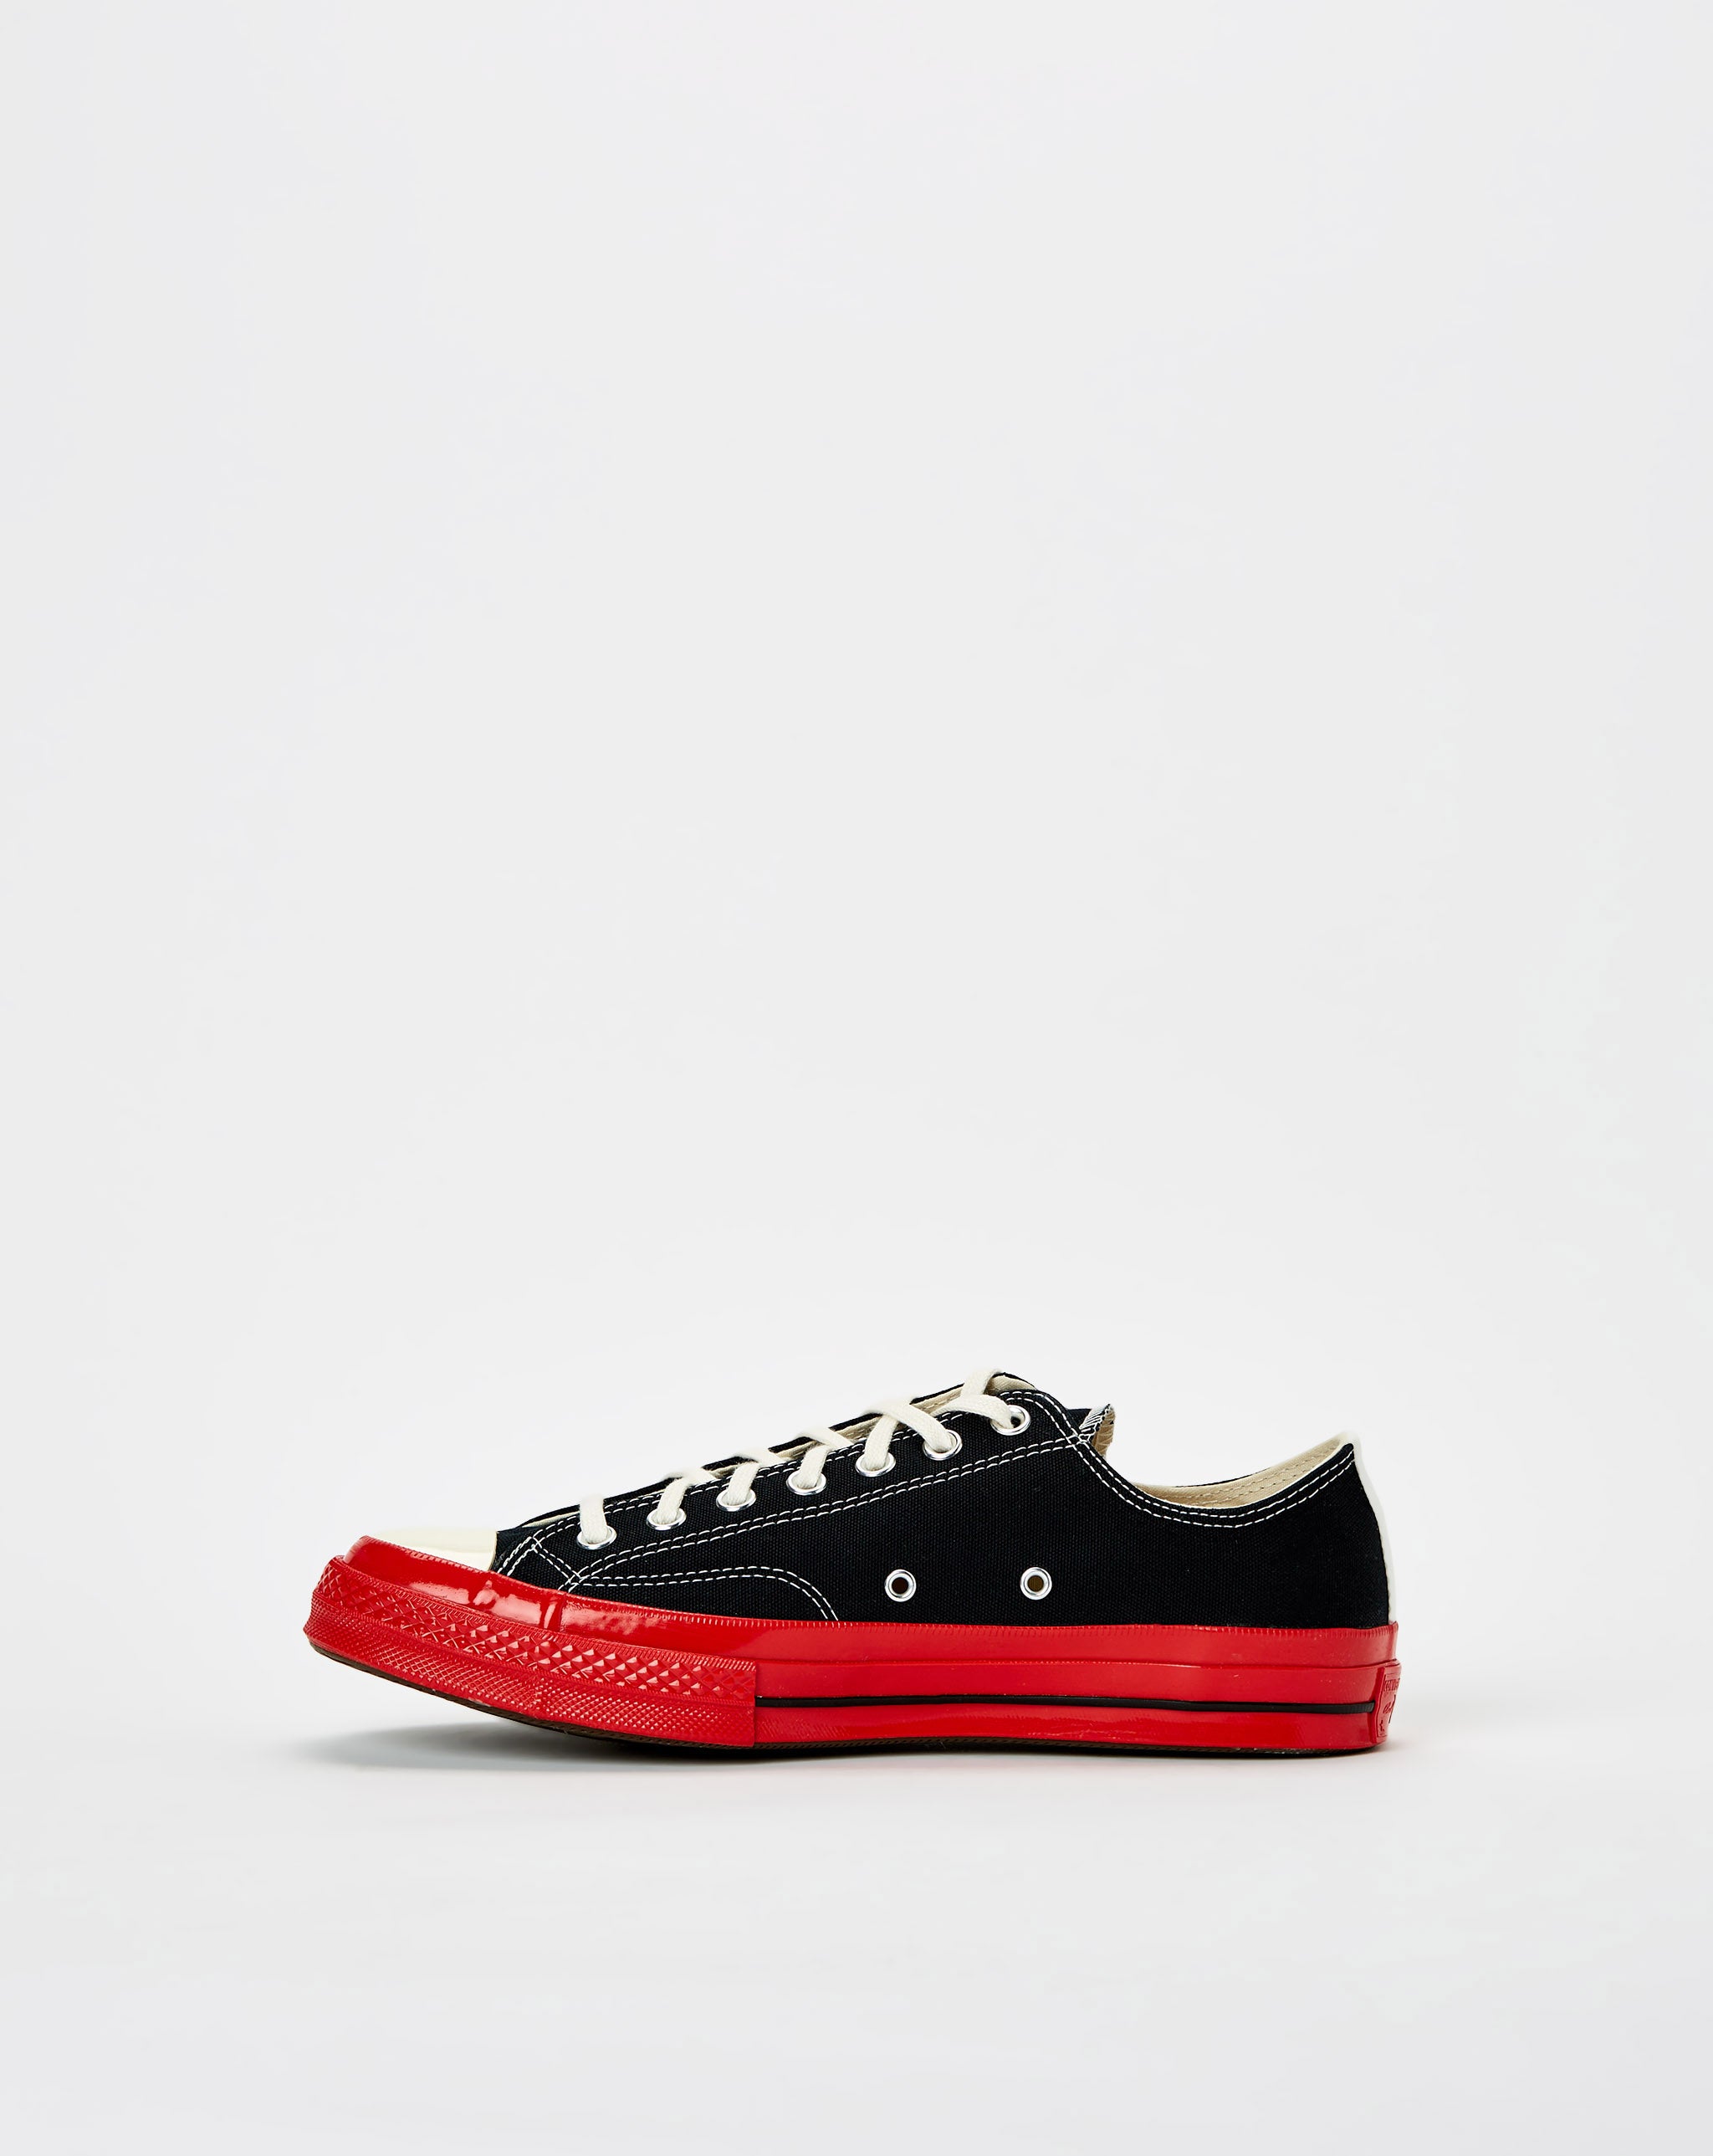 Converse and Patta and Converse retailers  - Cheap Cerbe Jordan outlet